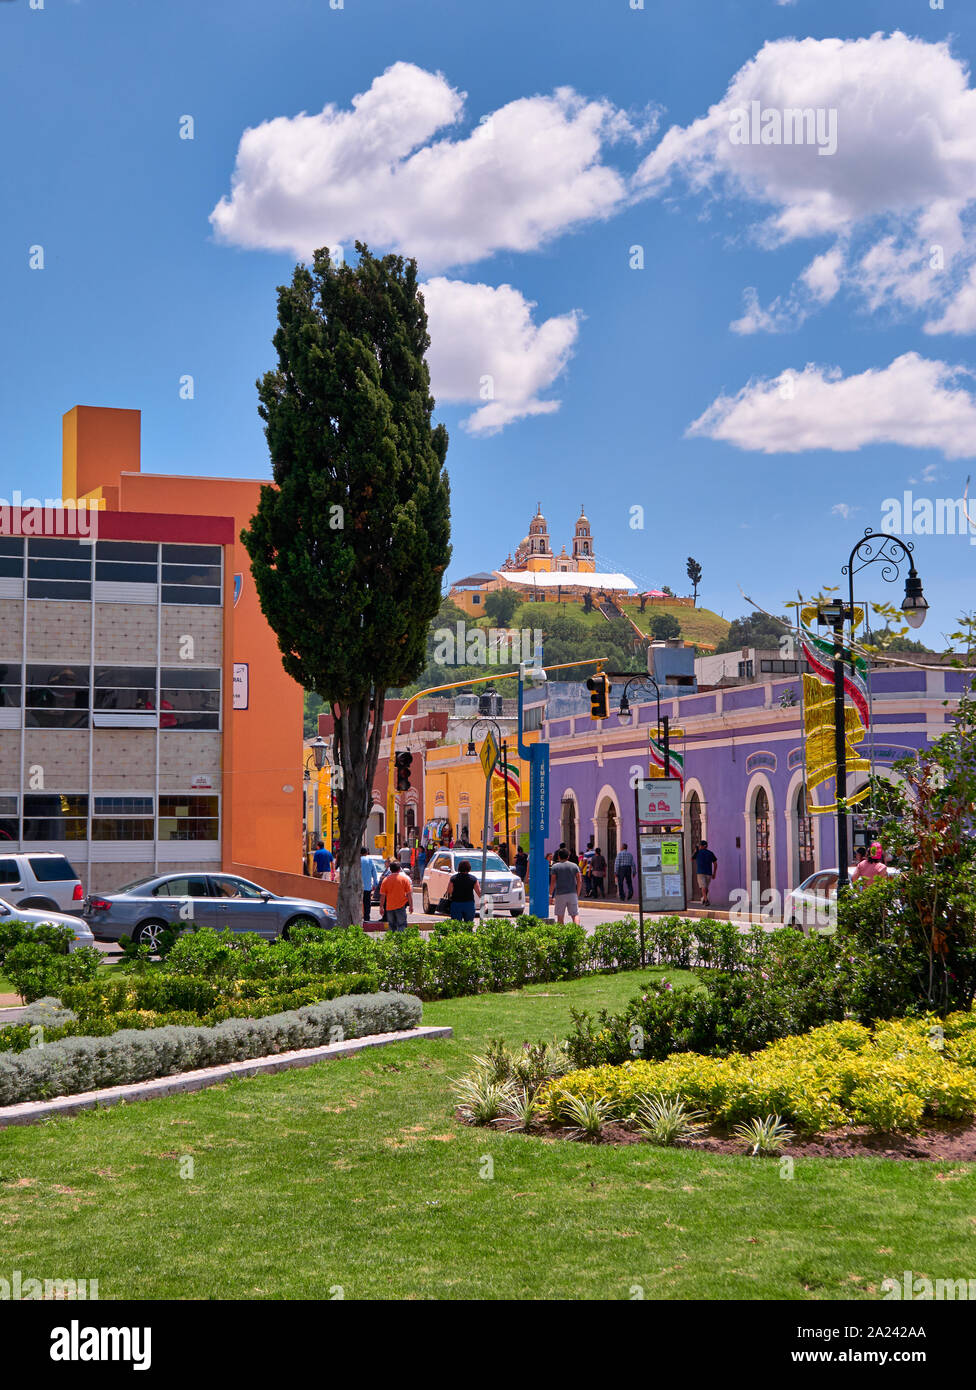 San Pedro Cholula, Mexico, September 30, 2018 - View of San Pedro Cholula center and Plaza de la Concordia Garden with Shrine of Our Lady of Remedies in background. Stock Photo